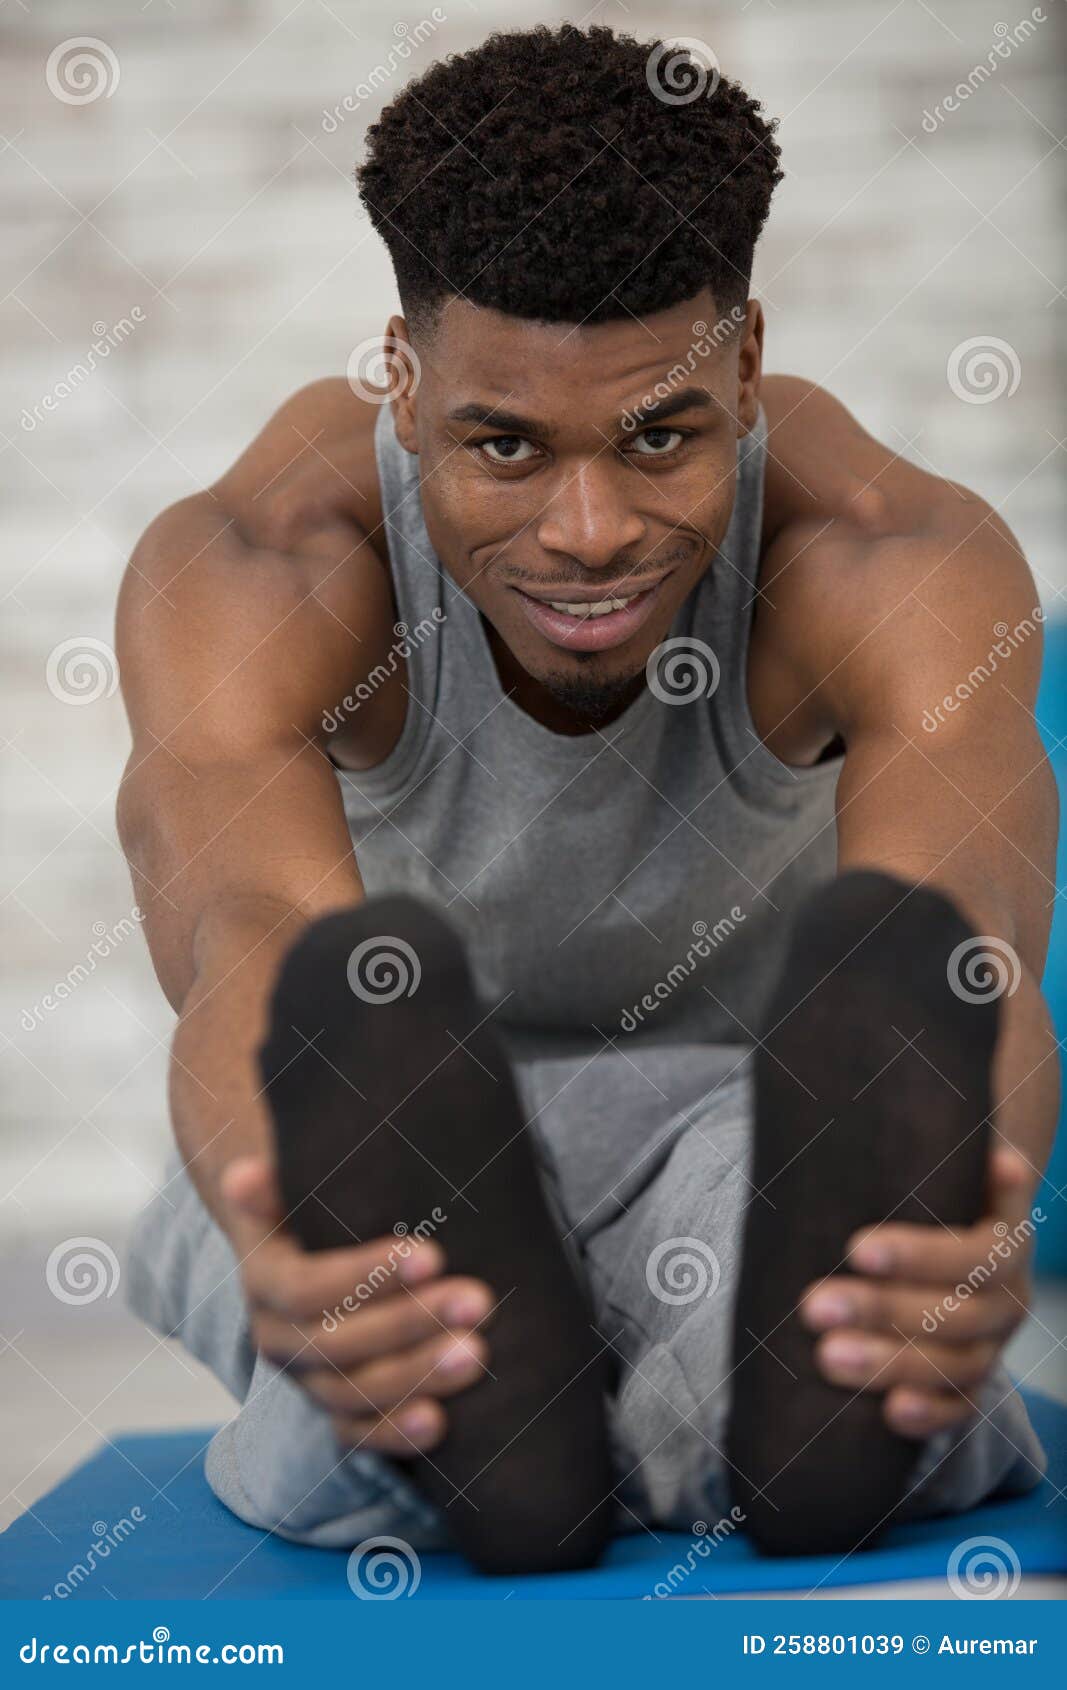 focused mid adult man stretching leg while practicing yoga